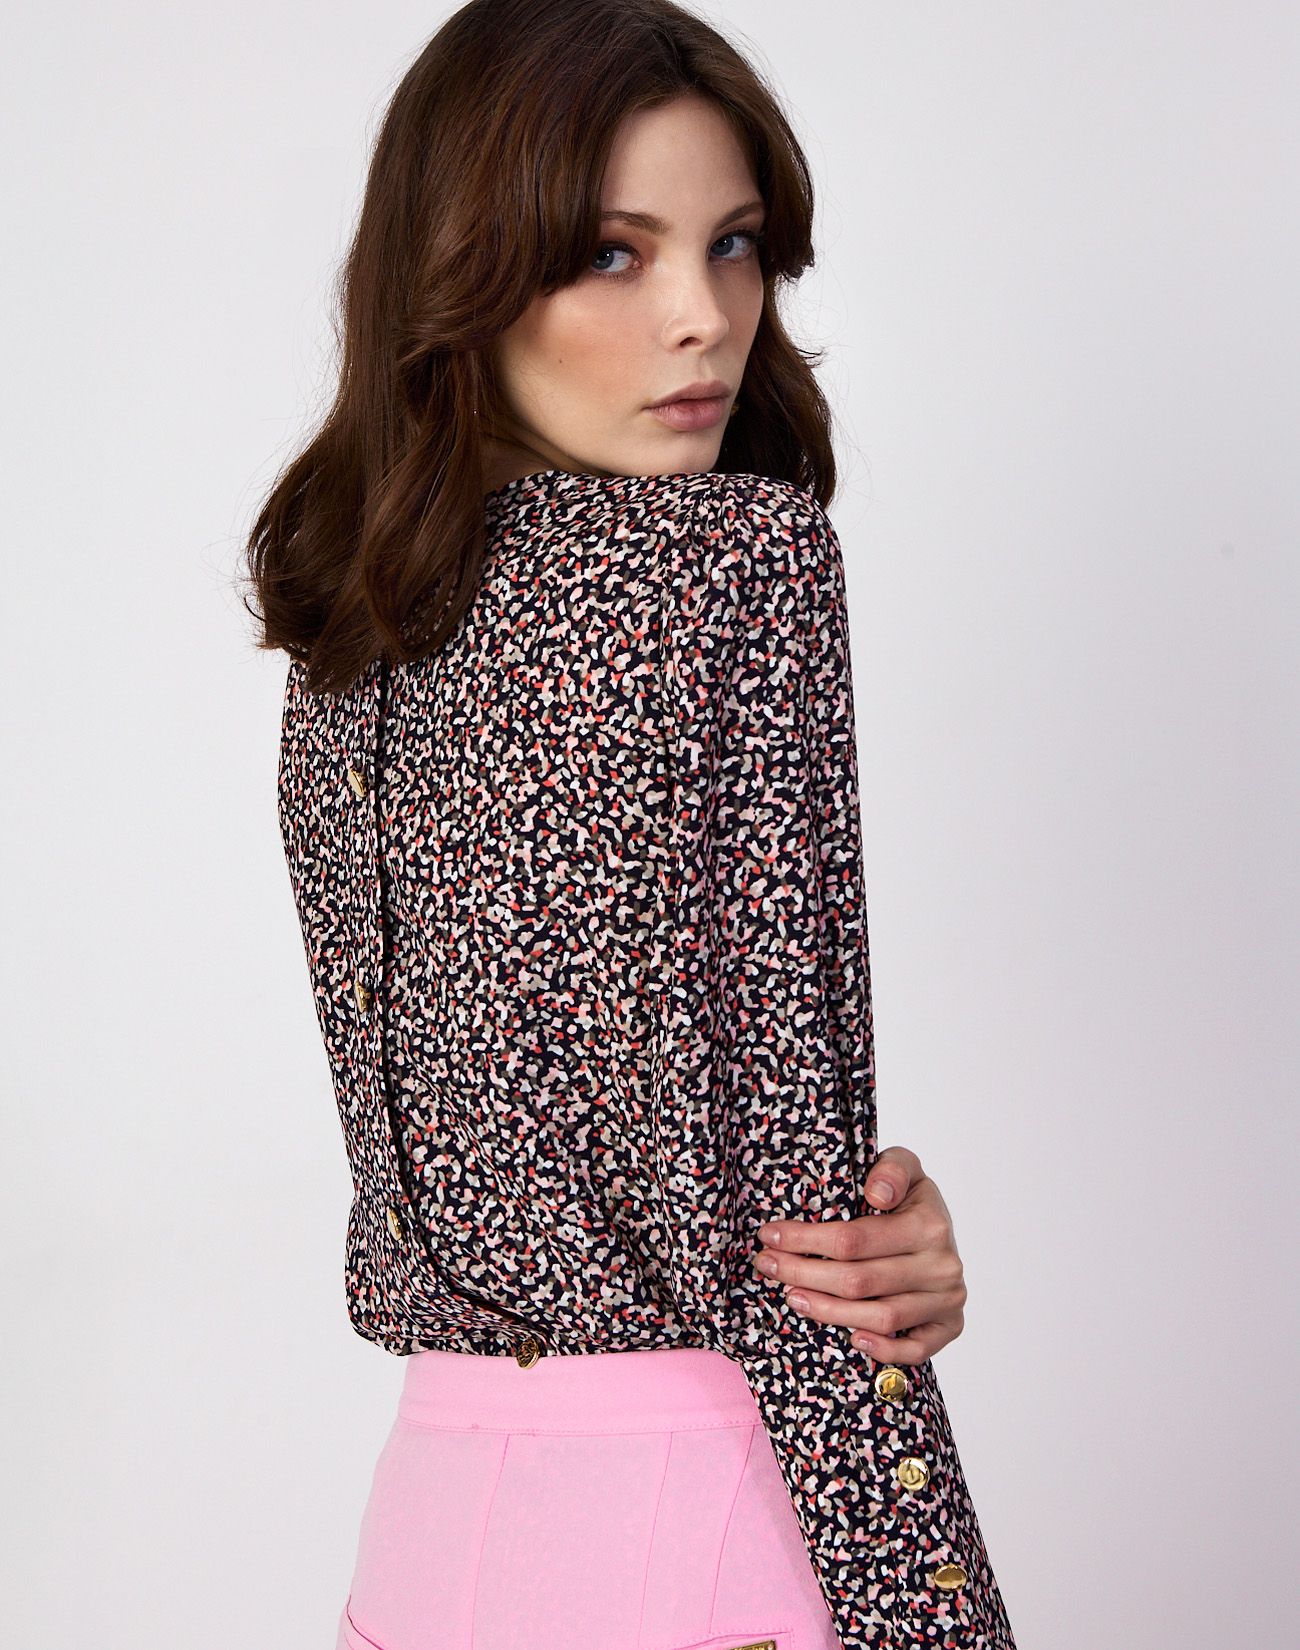 Printed top with golden buttons